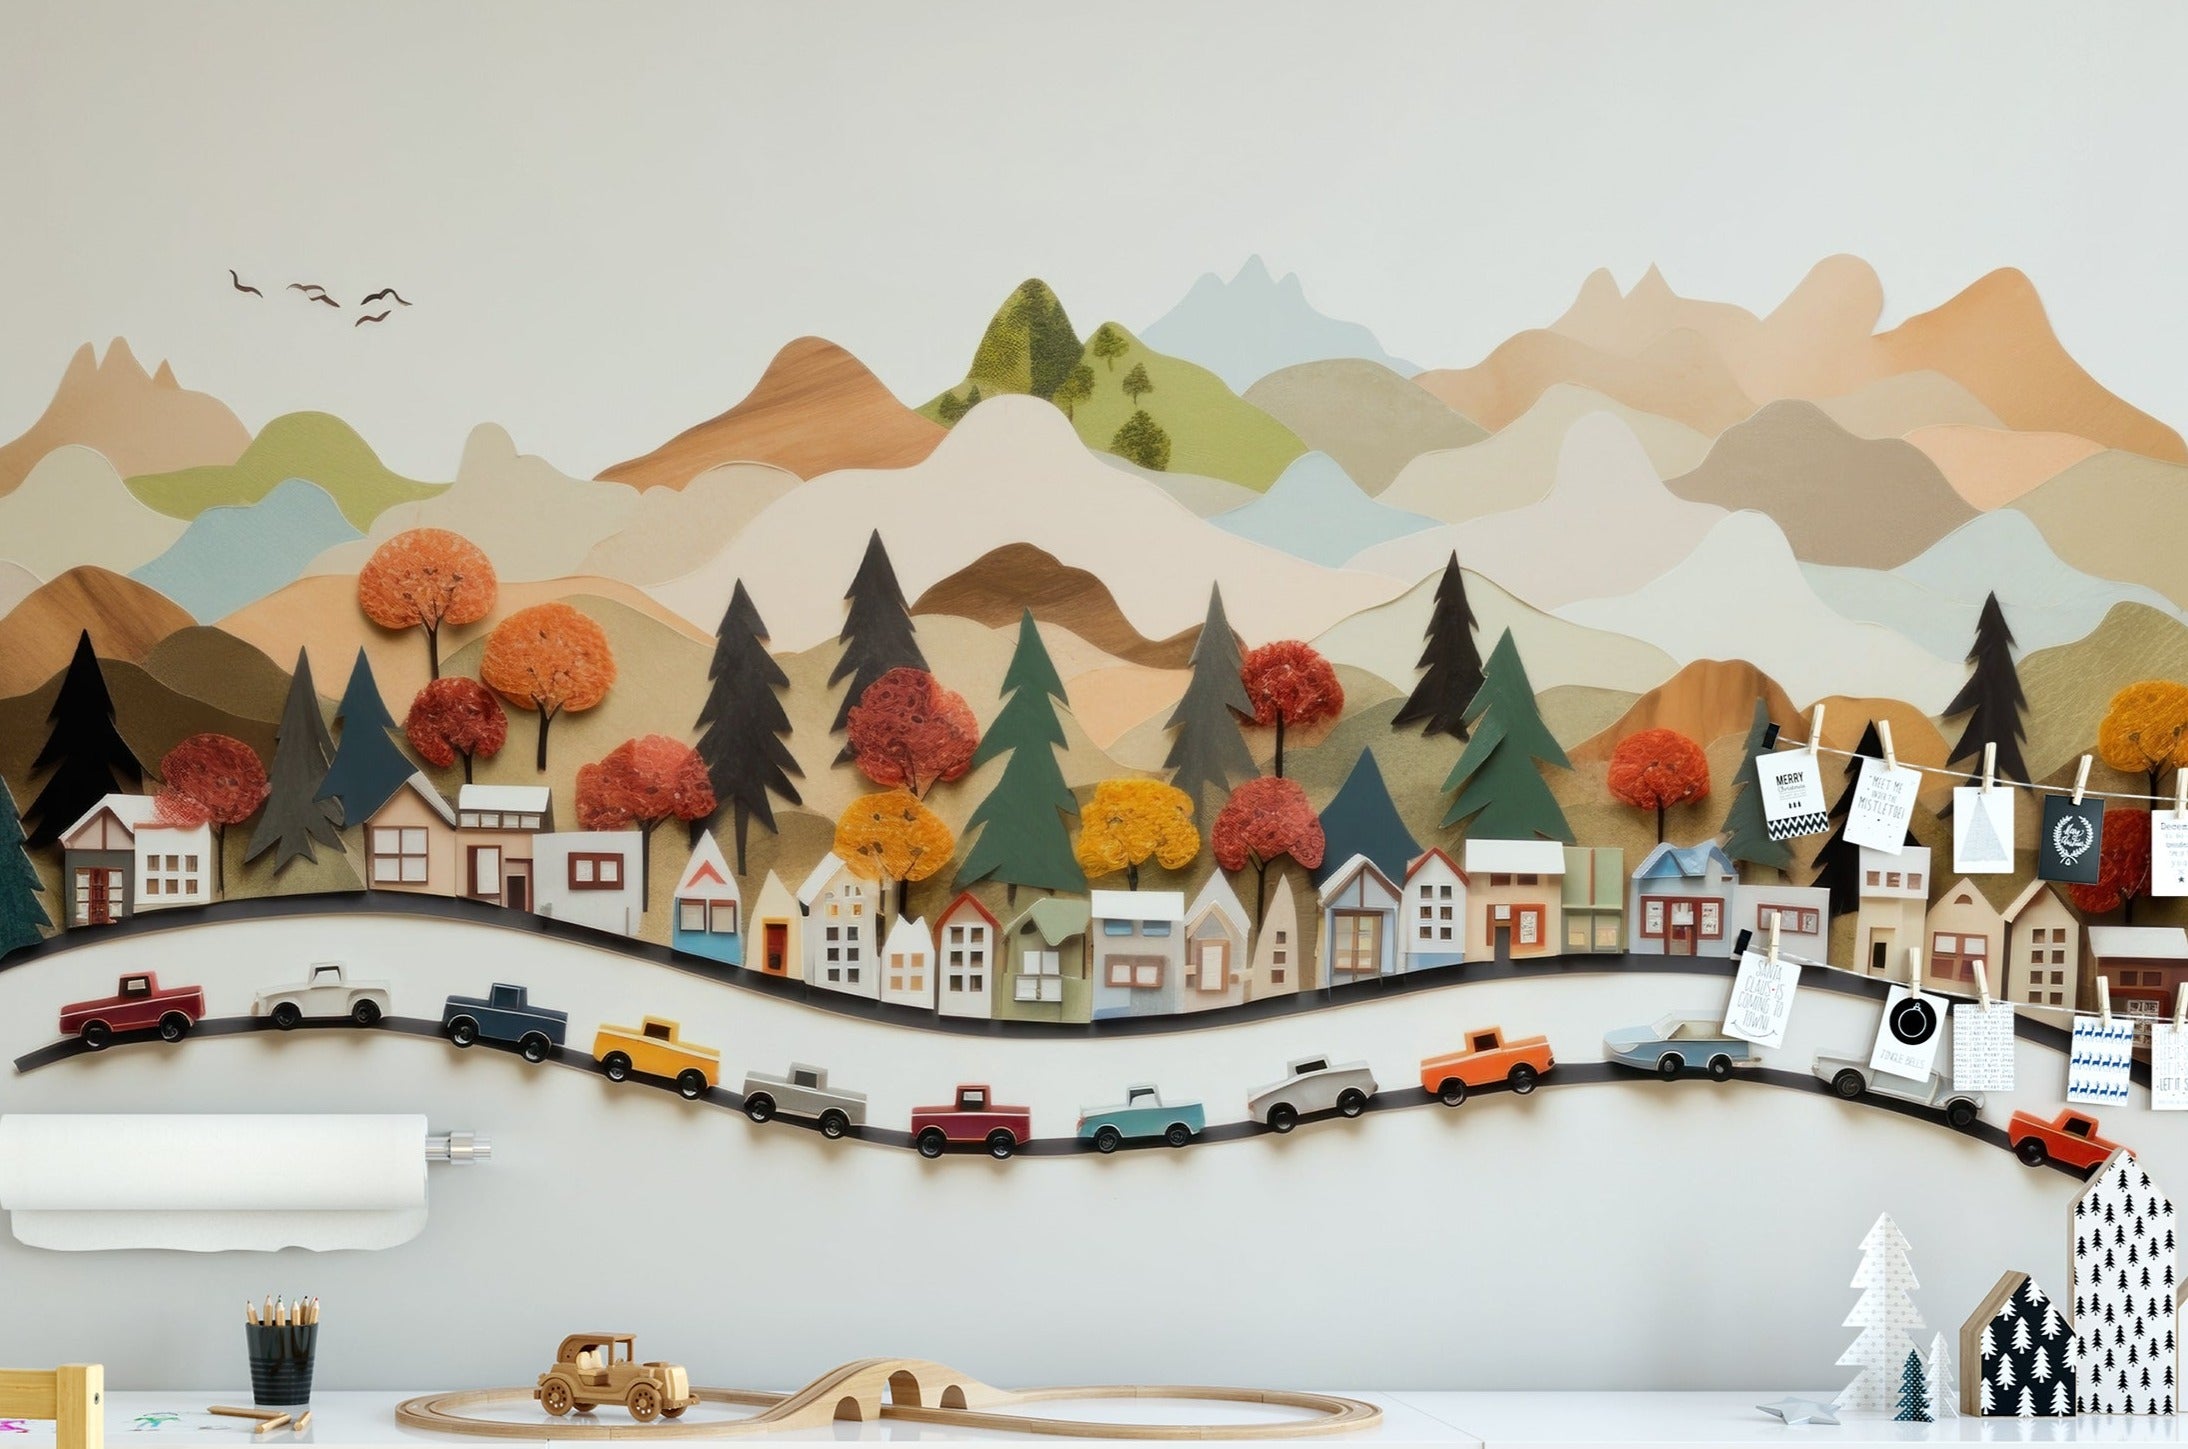 Child's playroom featuring a 'Craft Car Mural' with a scenic village, colorful trees, and toy cars on a winding road across rolling hills.